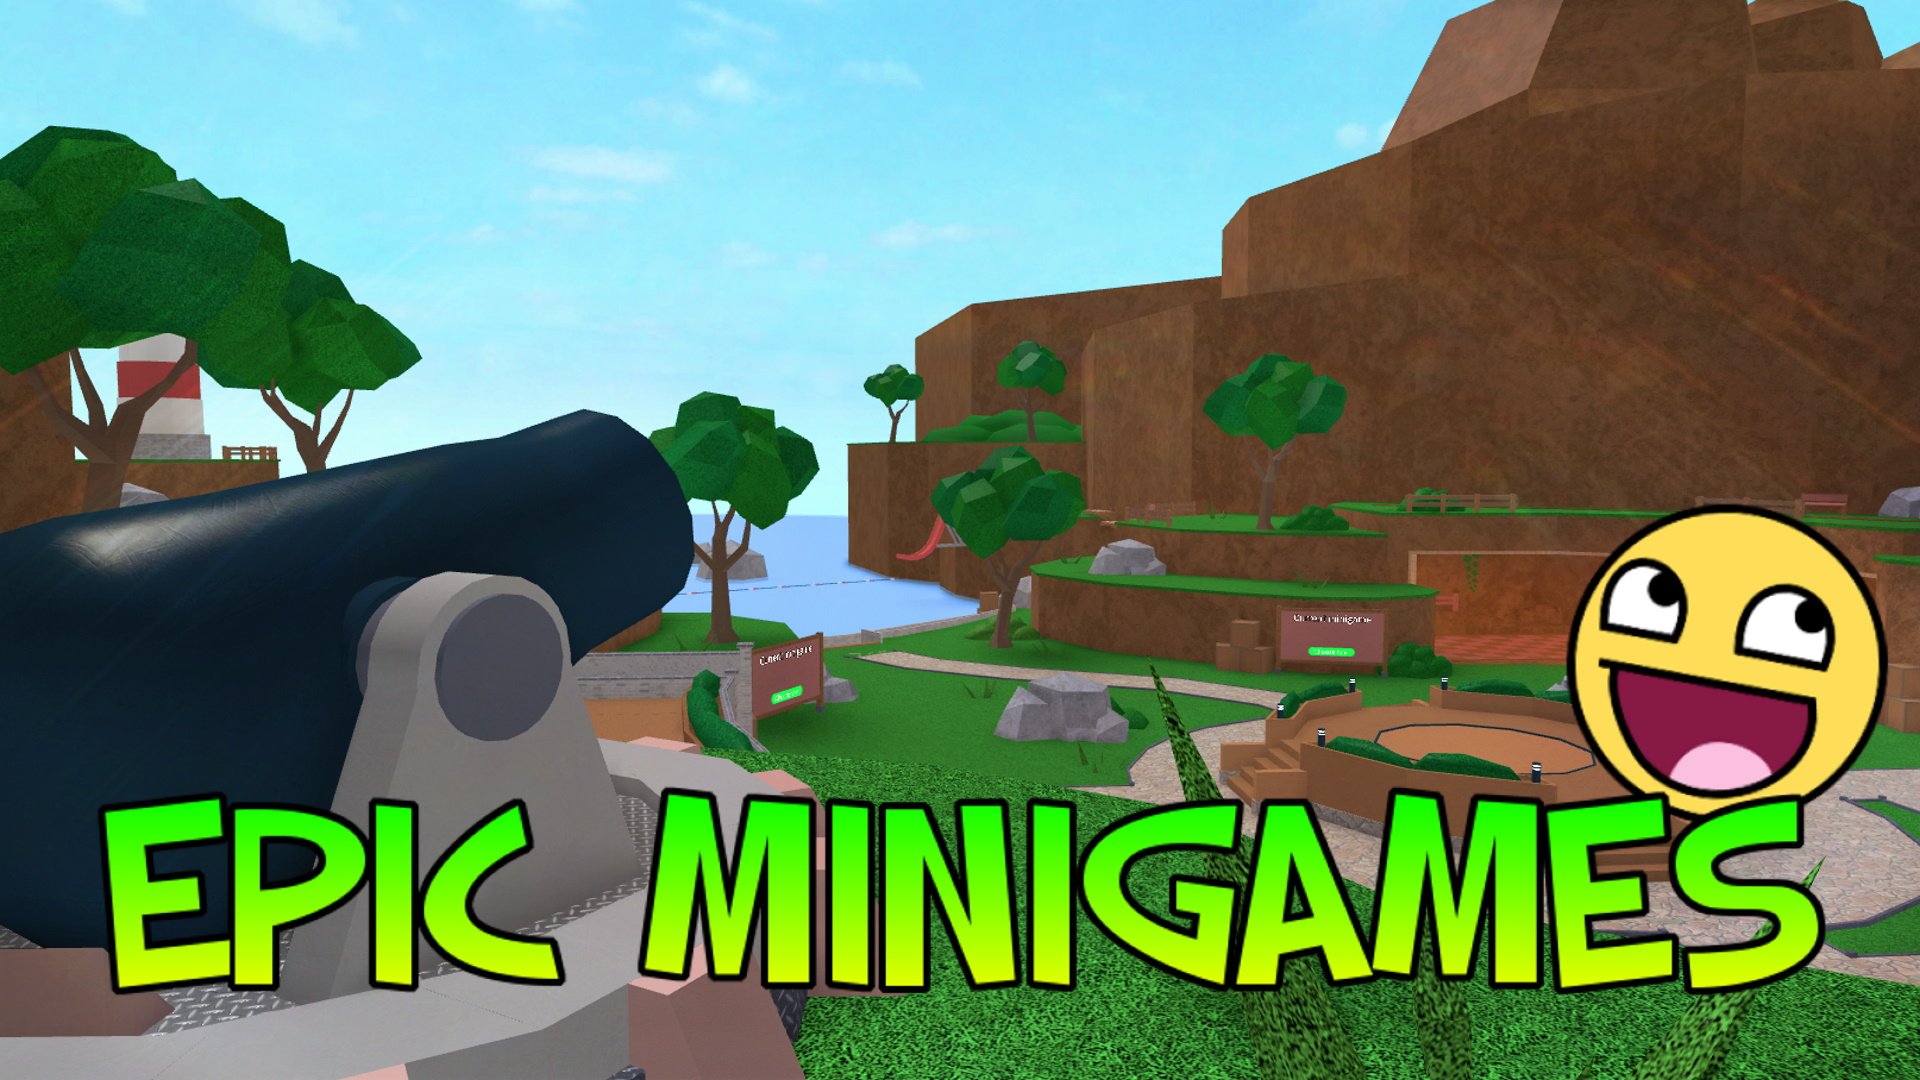 Typicaltype On Twitter After Almost 4 Years Epic Minigames Finally Has A New Lobby Created By None Other Than Worthykazoo Also In This Update Are 3 New Maps For Existing Minigames Https T Co O4wmdst9in - the secret room epic minigames roblox